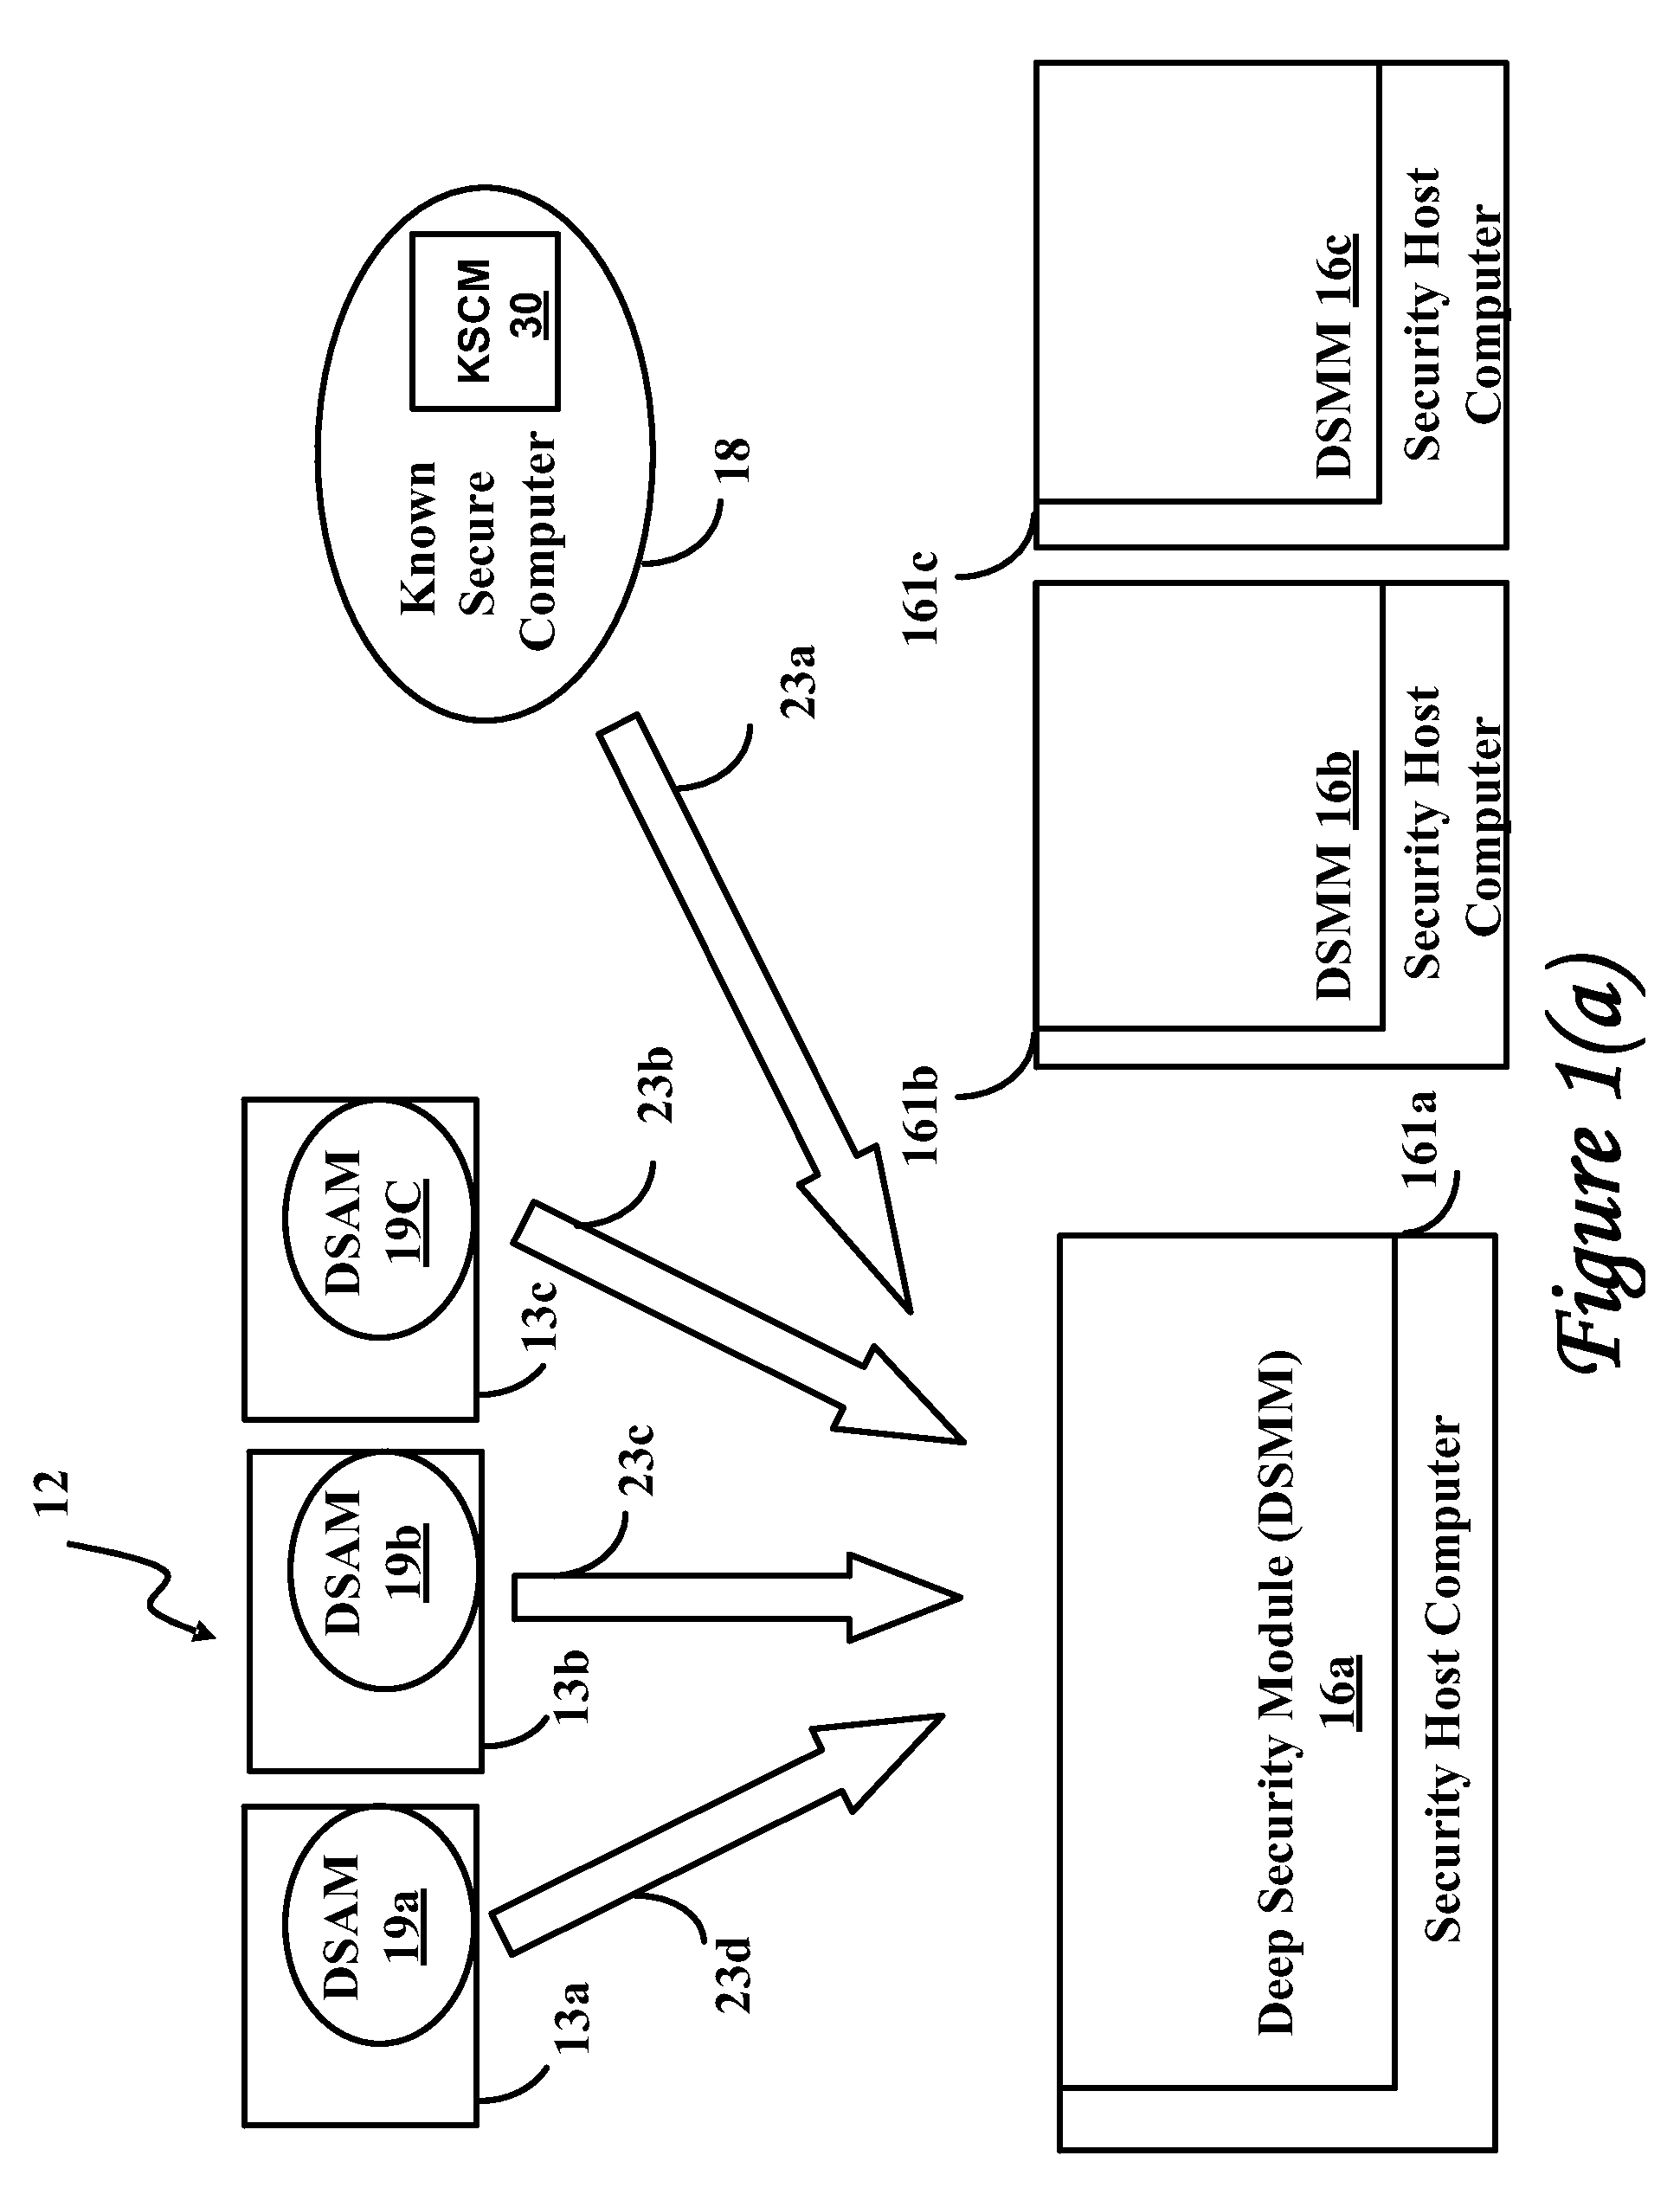 Method and system for real time classification of events in computer integrity system